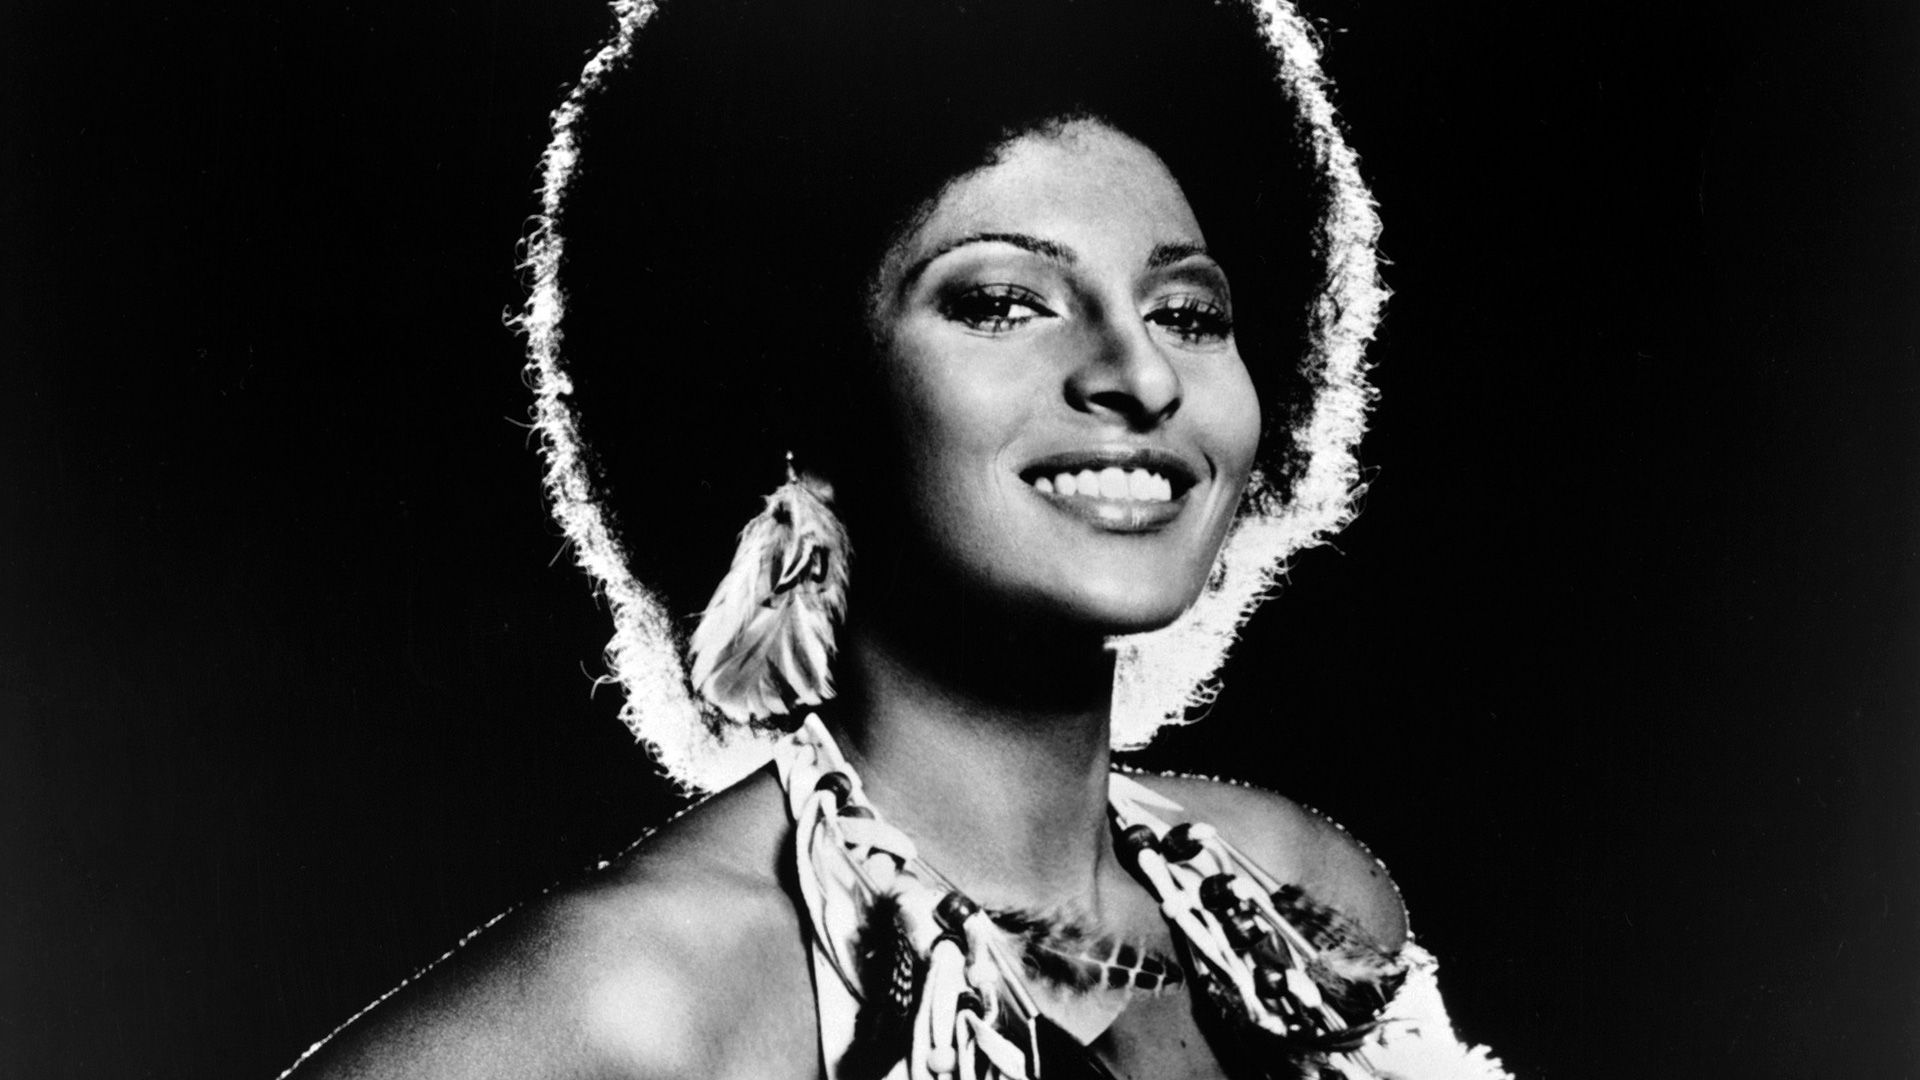 April 5, 1974: "Foxy Brown" Starring Pam Grier Was Released.